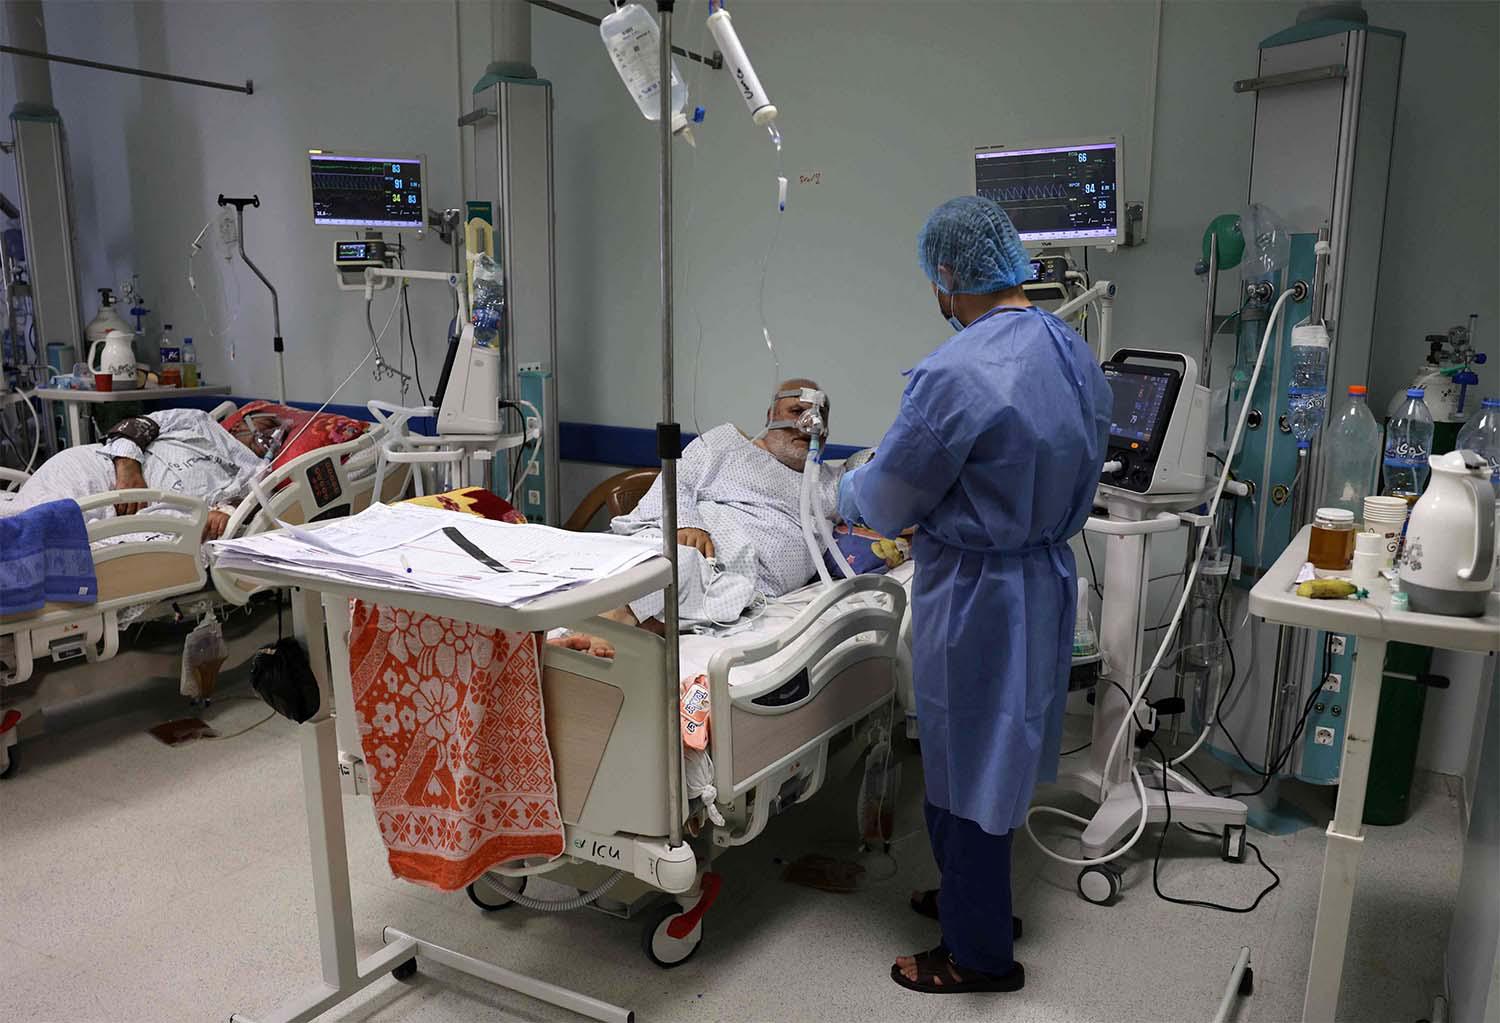 Gaza's limited medical infrastructure made the situation worse